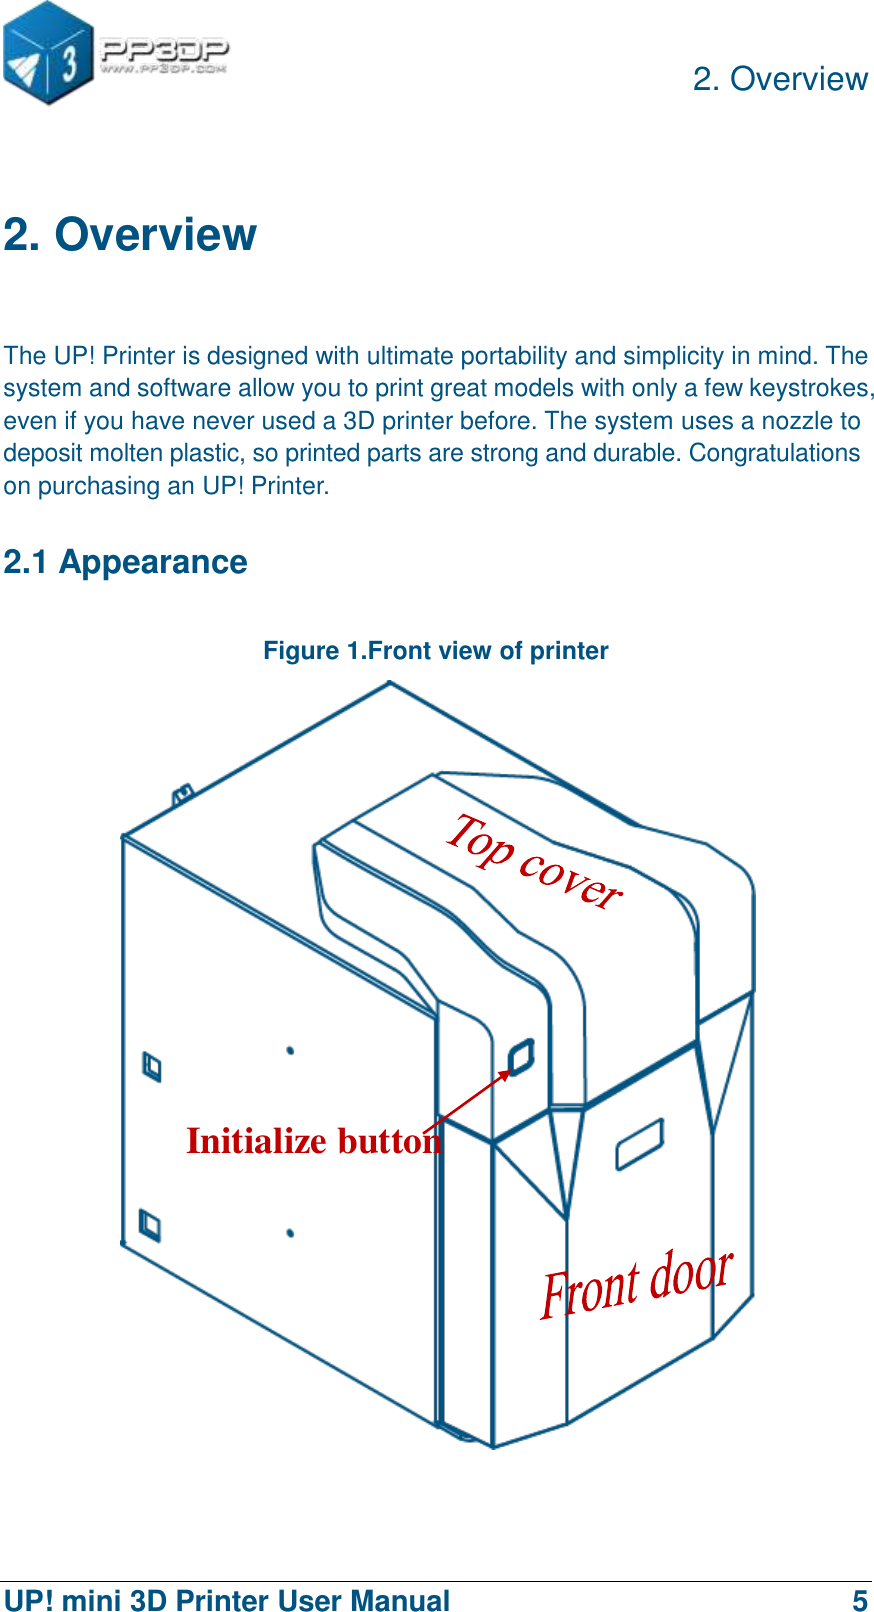          2. Overview  UP! mini 3D Printer User Manual                                5  2. Overview  The UP! Printer is designed with ultimate portability and simplicity in mind. The system and software allow you to print great models with only a few keystrokes, even if you have never used a 3D printer before. The system uses a nozzle to deposit molten plastic, so printed parts are strong and durable. Congratulations on purchasing an UP! Printer.   2.1 Appearance Figure 1.Front view of printer   Initialize button 